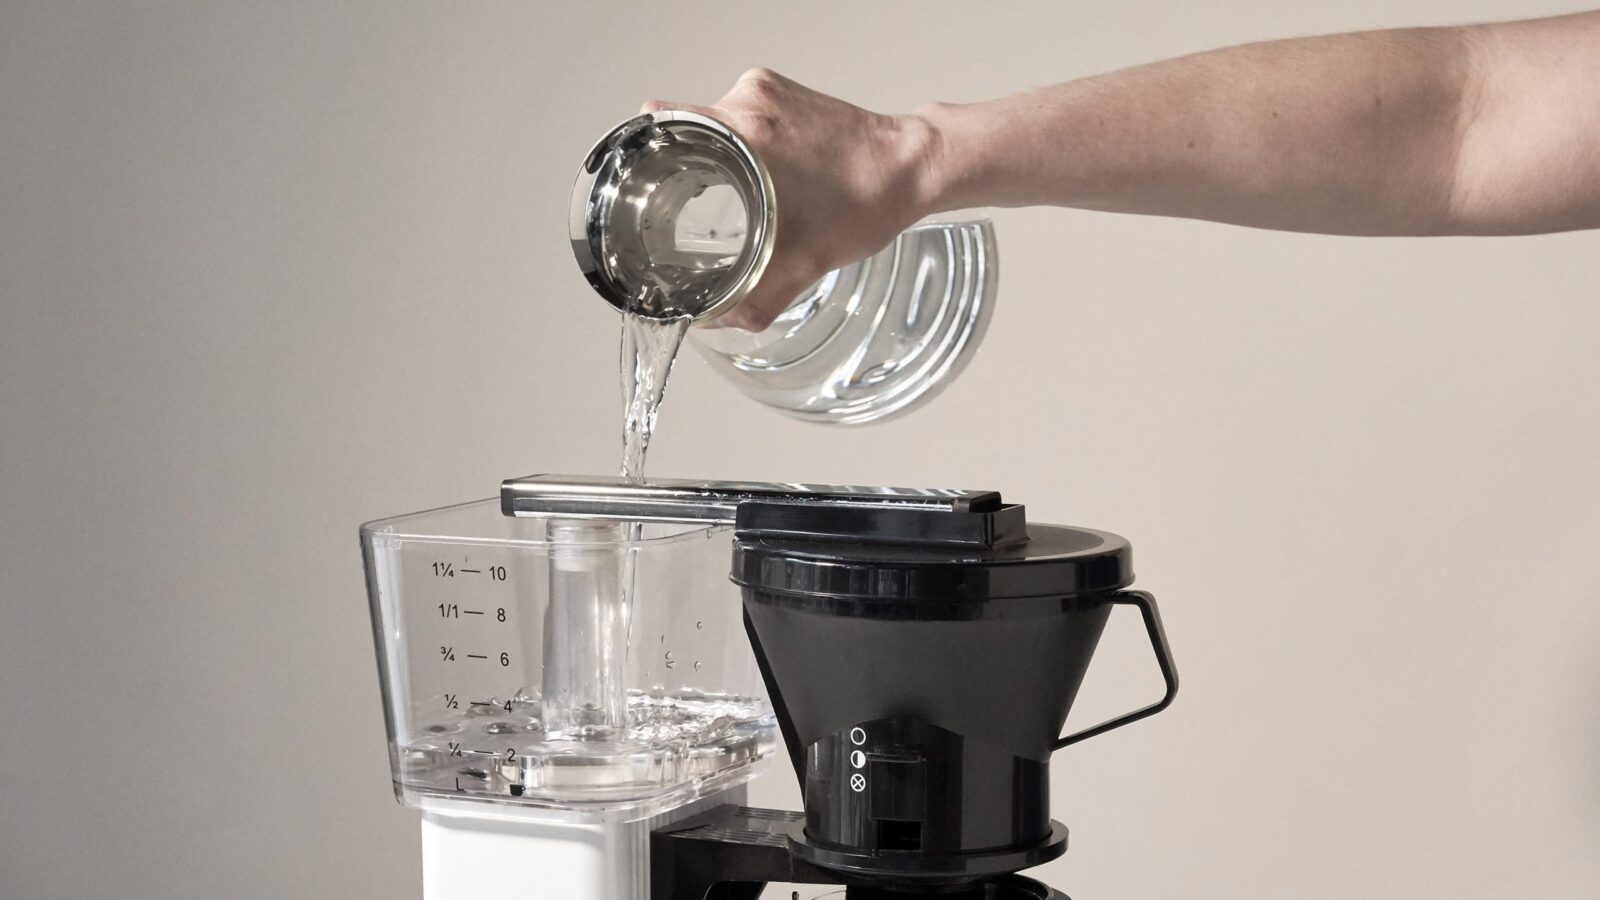 01 TRD20 Coffee Maker Water scaled - Ground Coffee